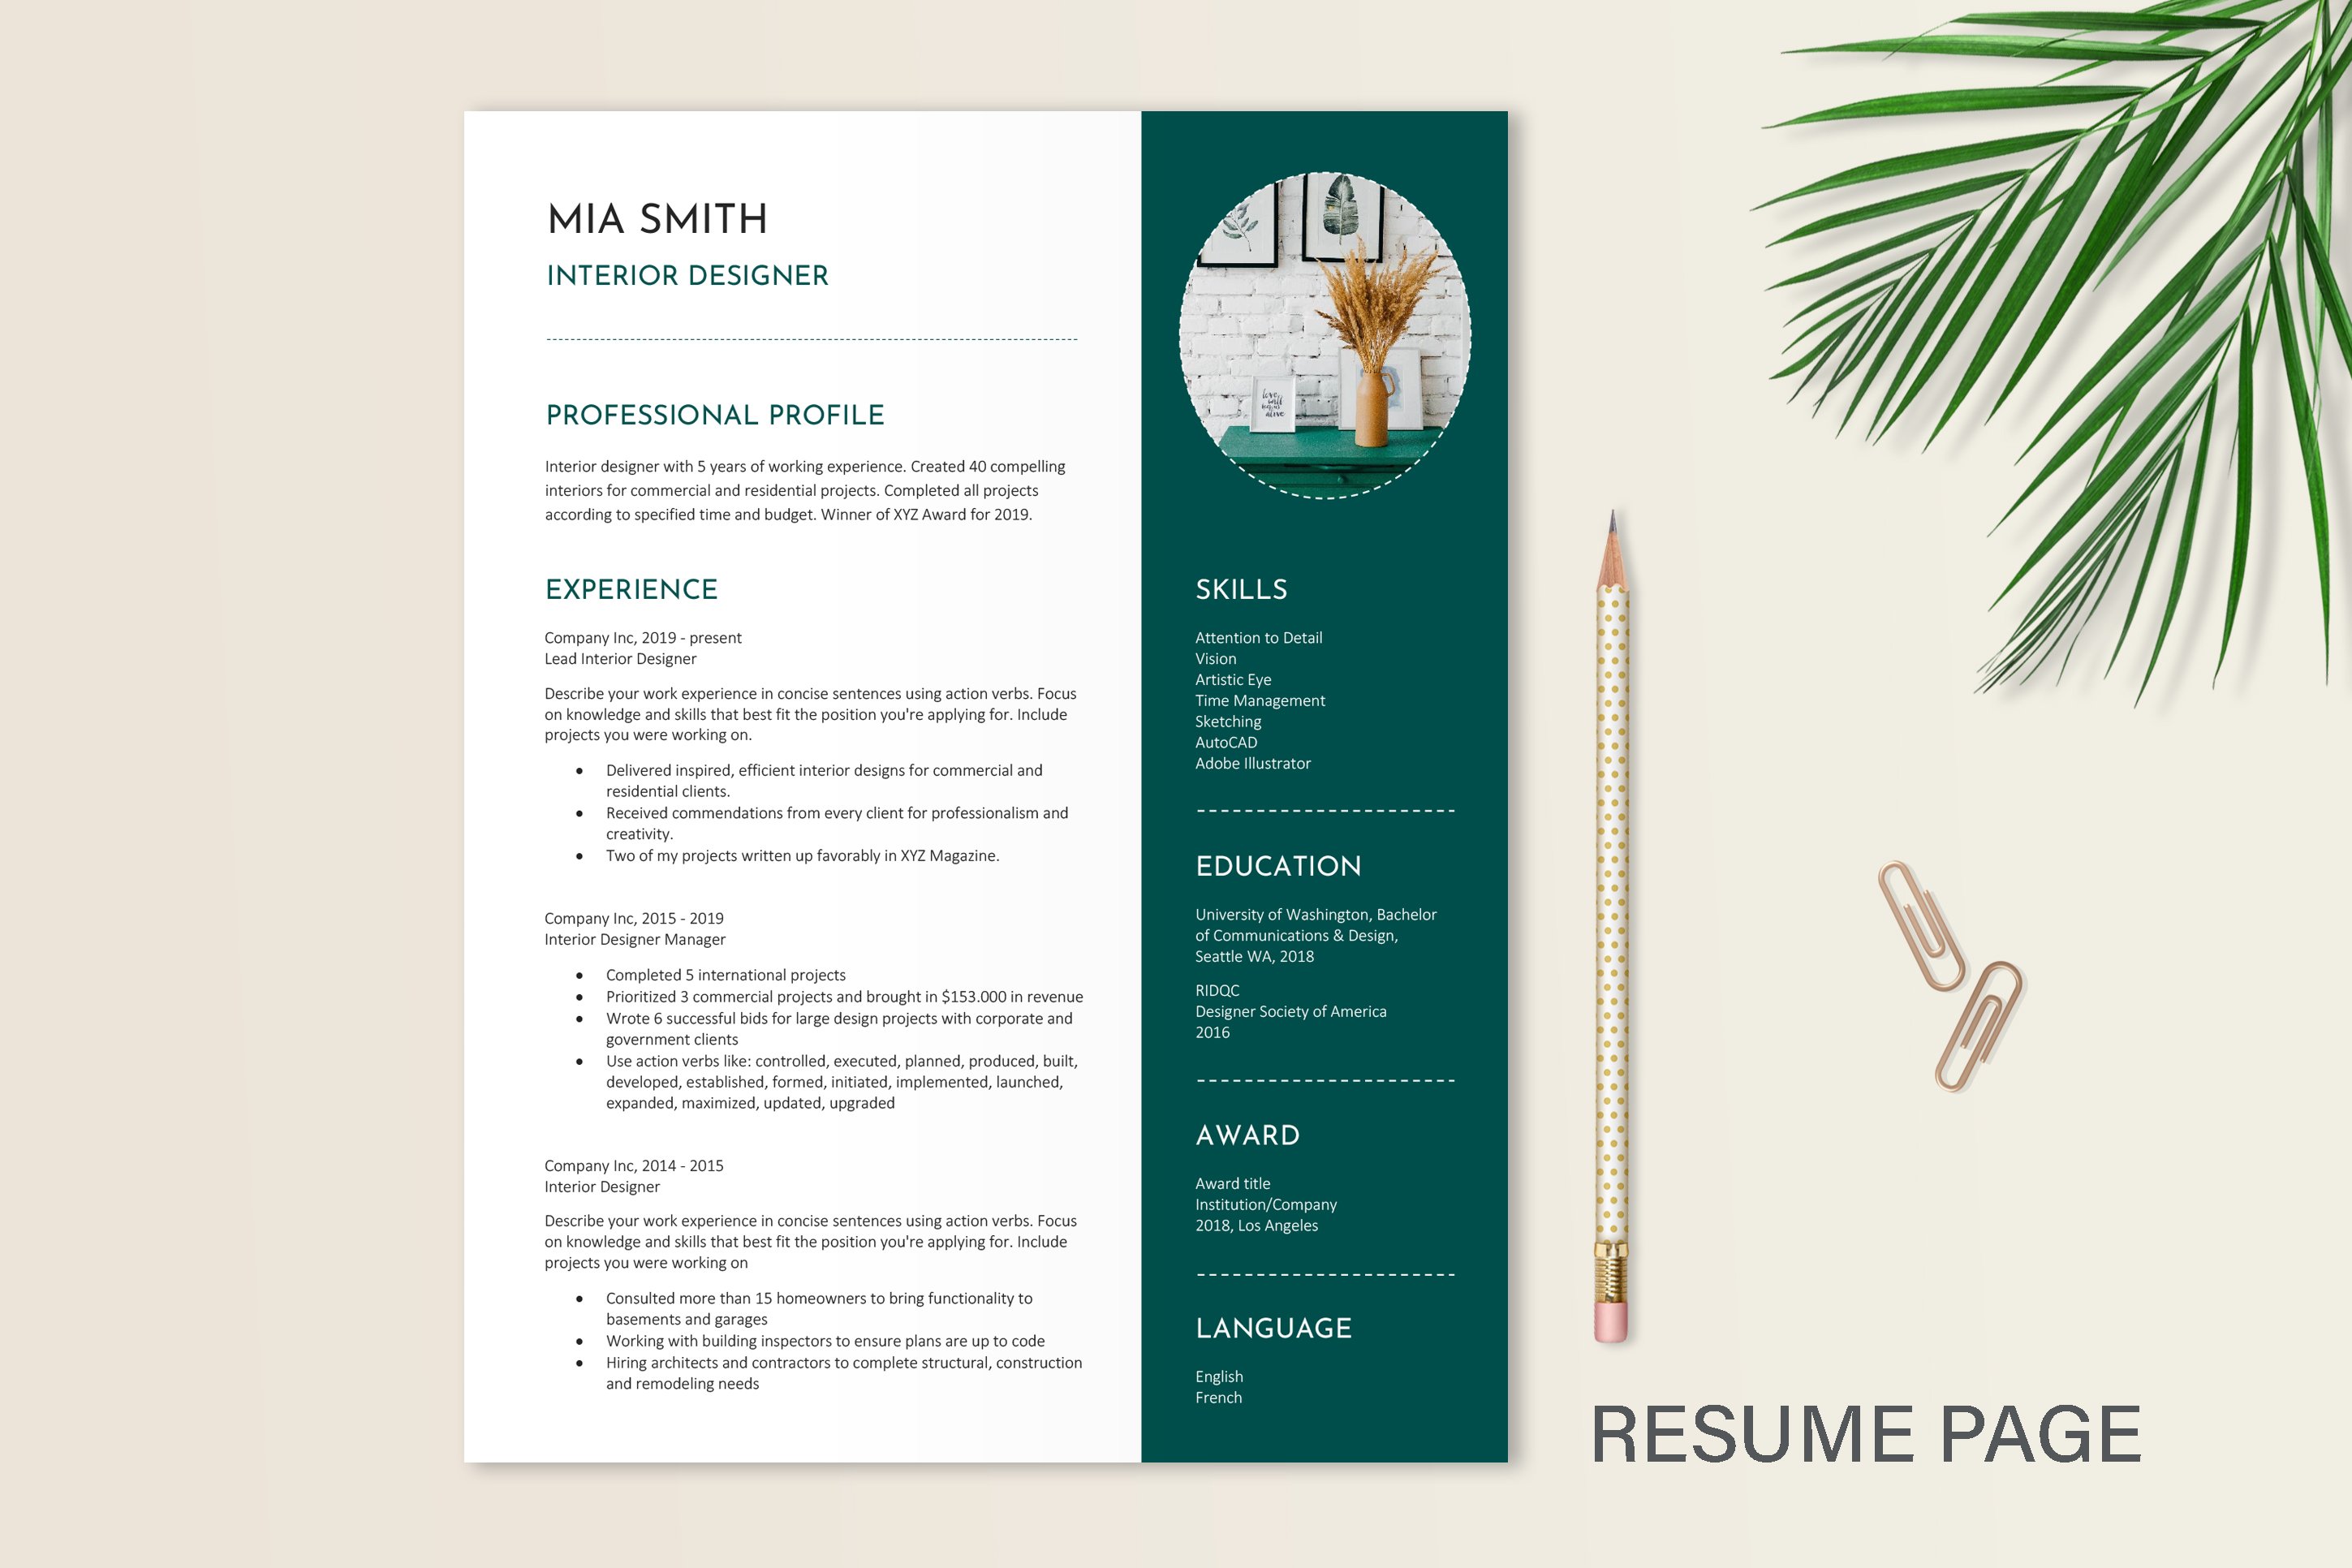 Green and white resume with a pencil.